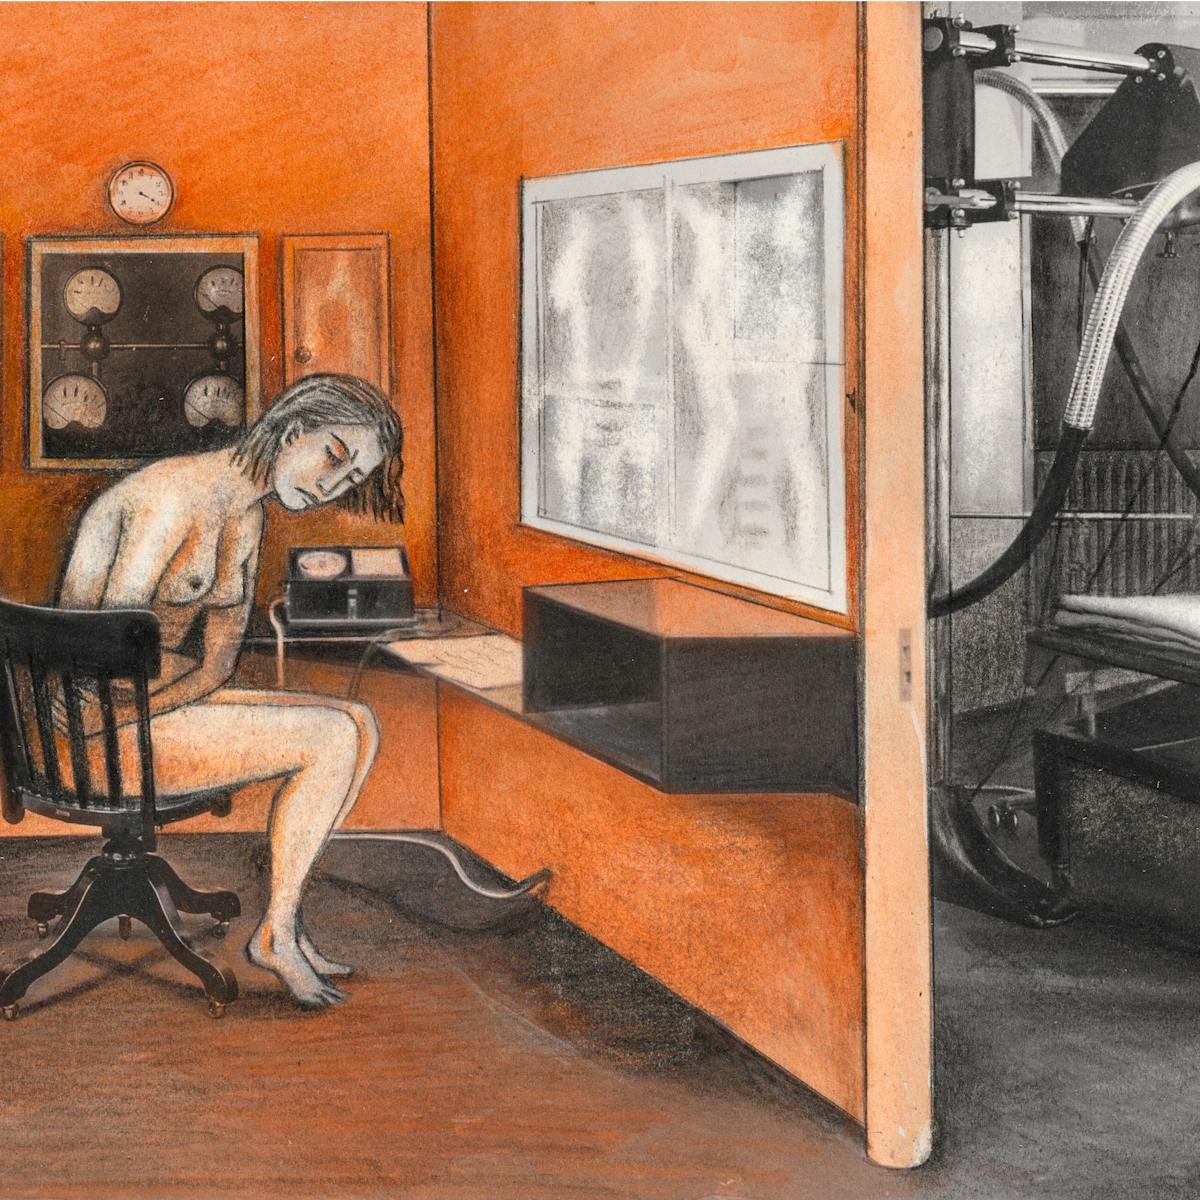 Collage and illustration of a hospital X-Ray room.  In the centre of the room is an unclothed woman sat on a black chair seemingly in pain with her eyes closed clutching her belly. Around her are various control boards with dials and x-ray like pictures on the wall.  Through a doorway on the right there is a hospital bed with various X-ray apparatus over it.  The image is primarily black and white, with the left side room having been coloured various shades of orange and red.